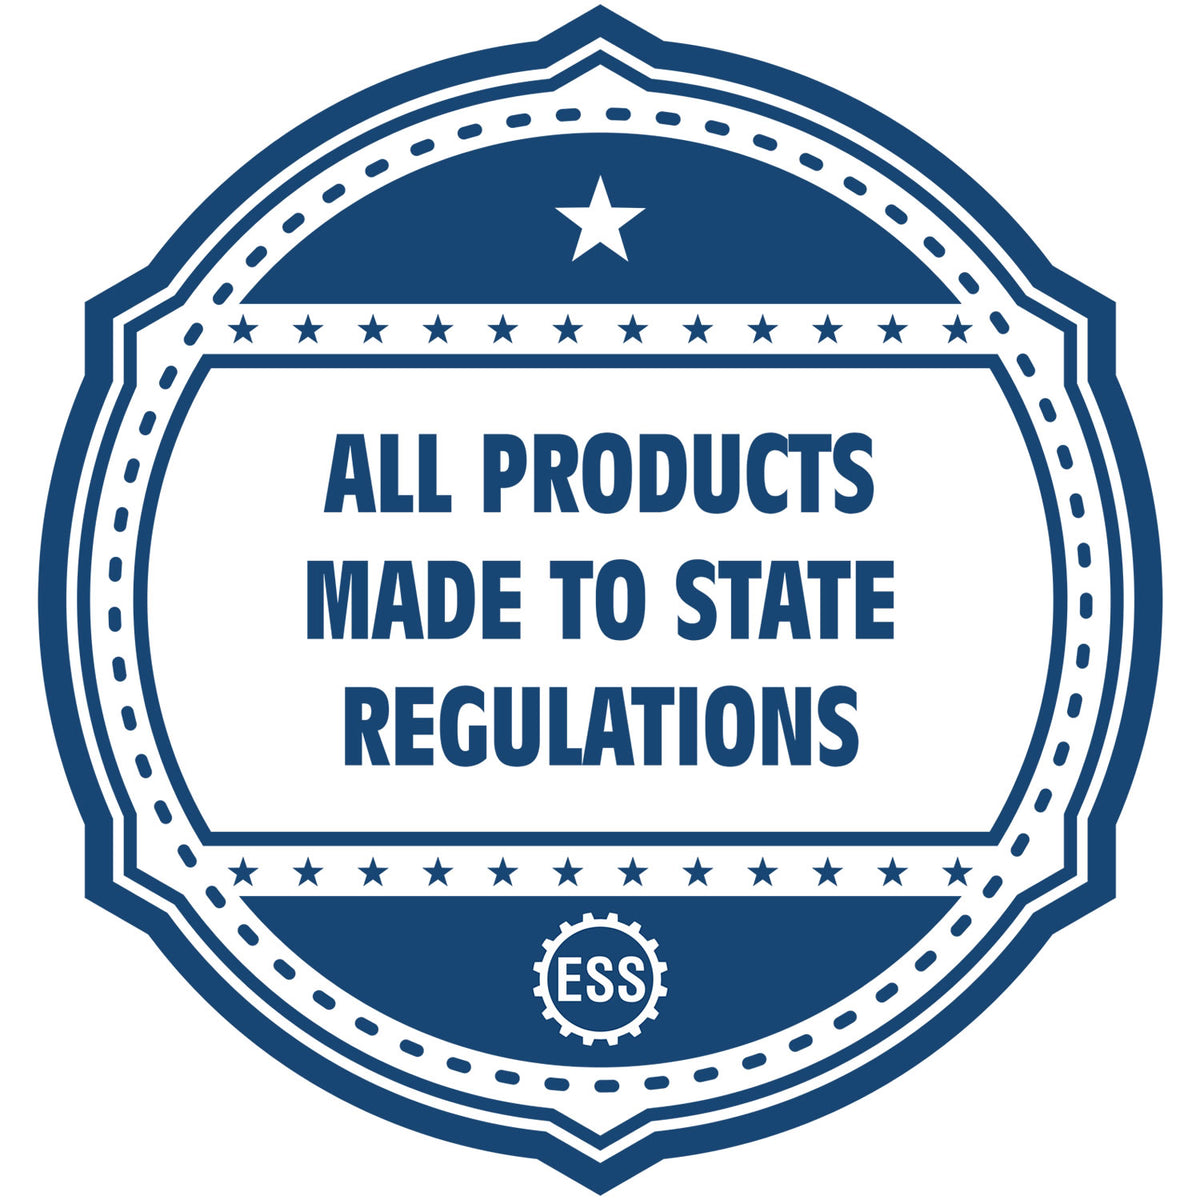 An icon or badge element for the New Hampshire Professional Engineer Seal Stamp showing that this product is made in compliance with state regulations.